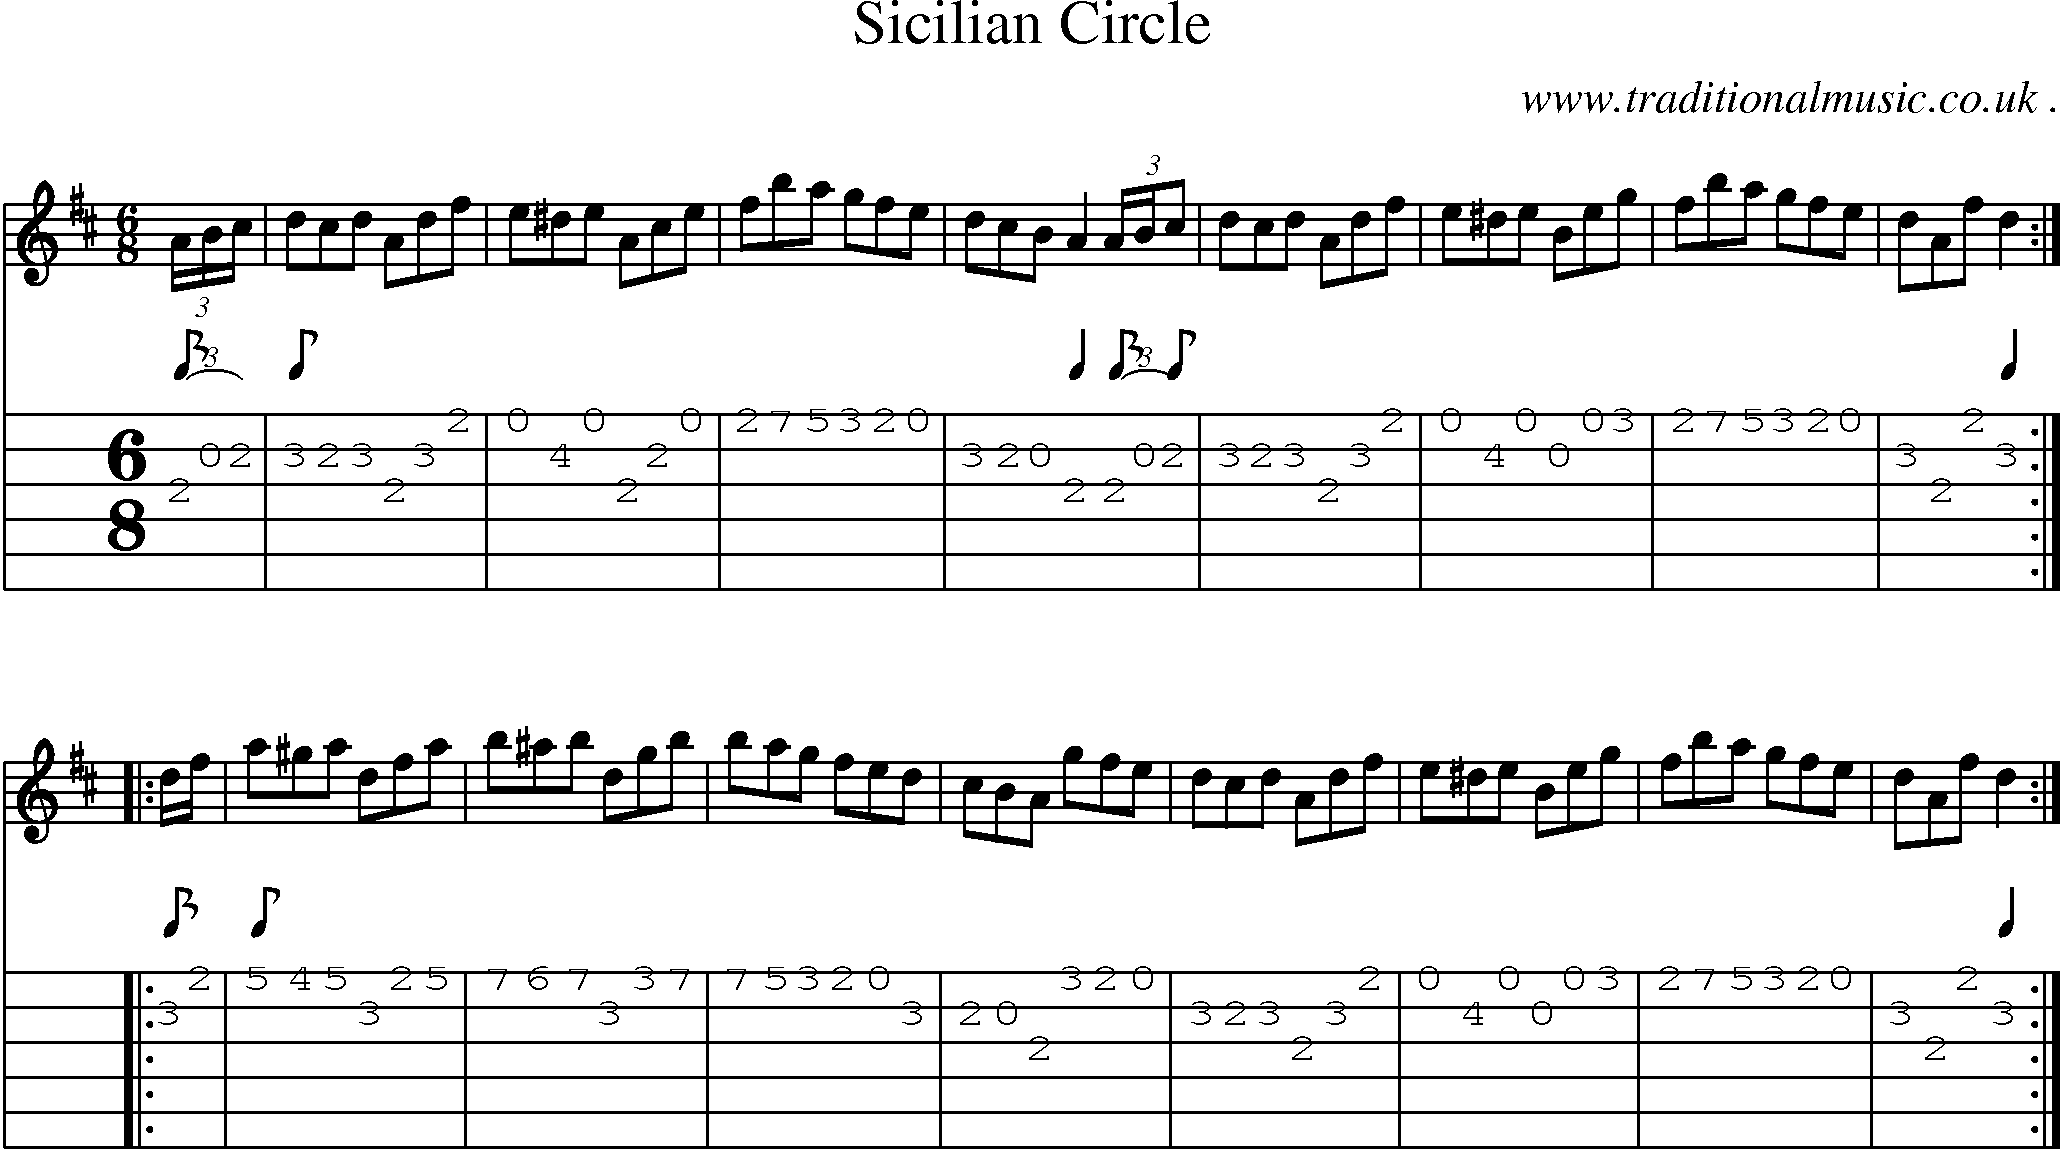 Sheet-music  score, Chords and Guitar Tabs for Sicilian Circle